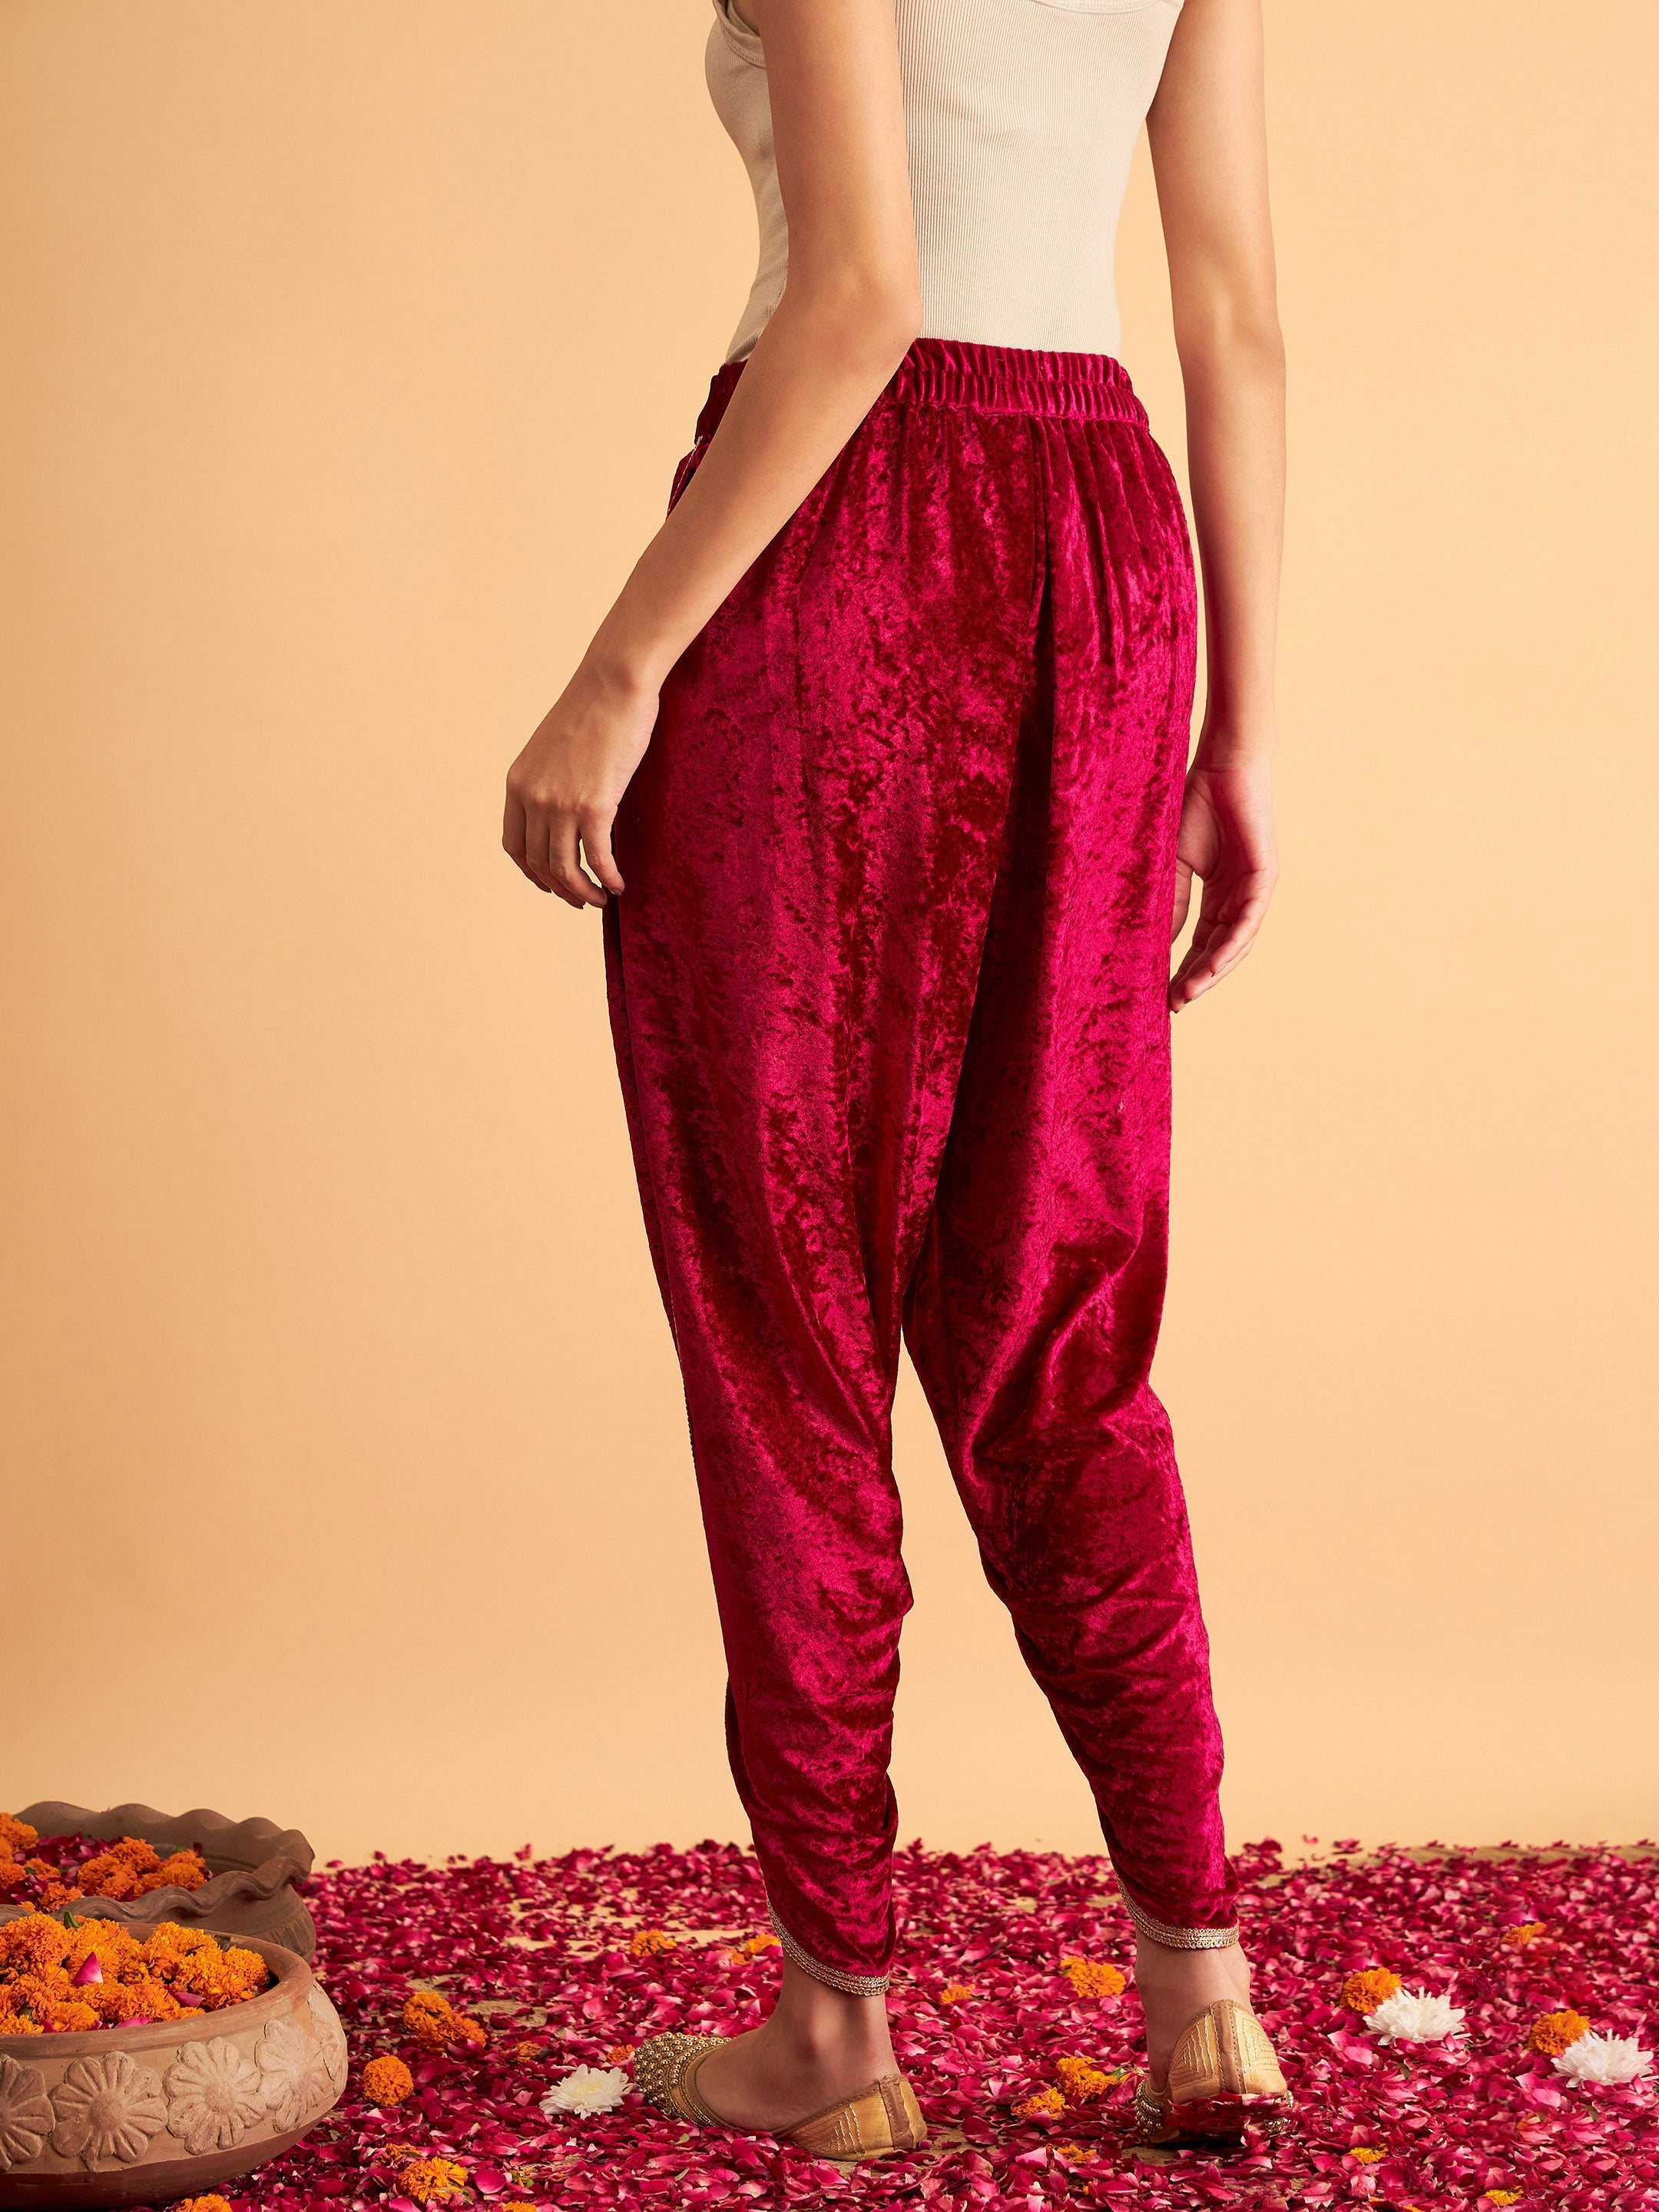 Buy Present Indian Women Dhoti Pants Pleated Harem Patiala Style for Women  India Clothing Free Size (28 Till 34) Printed Dhoti Red Color at Amazon.in